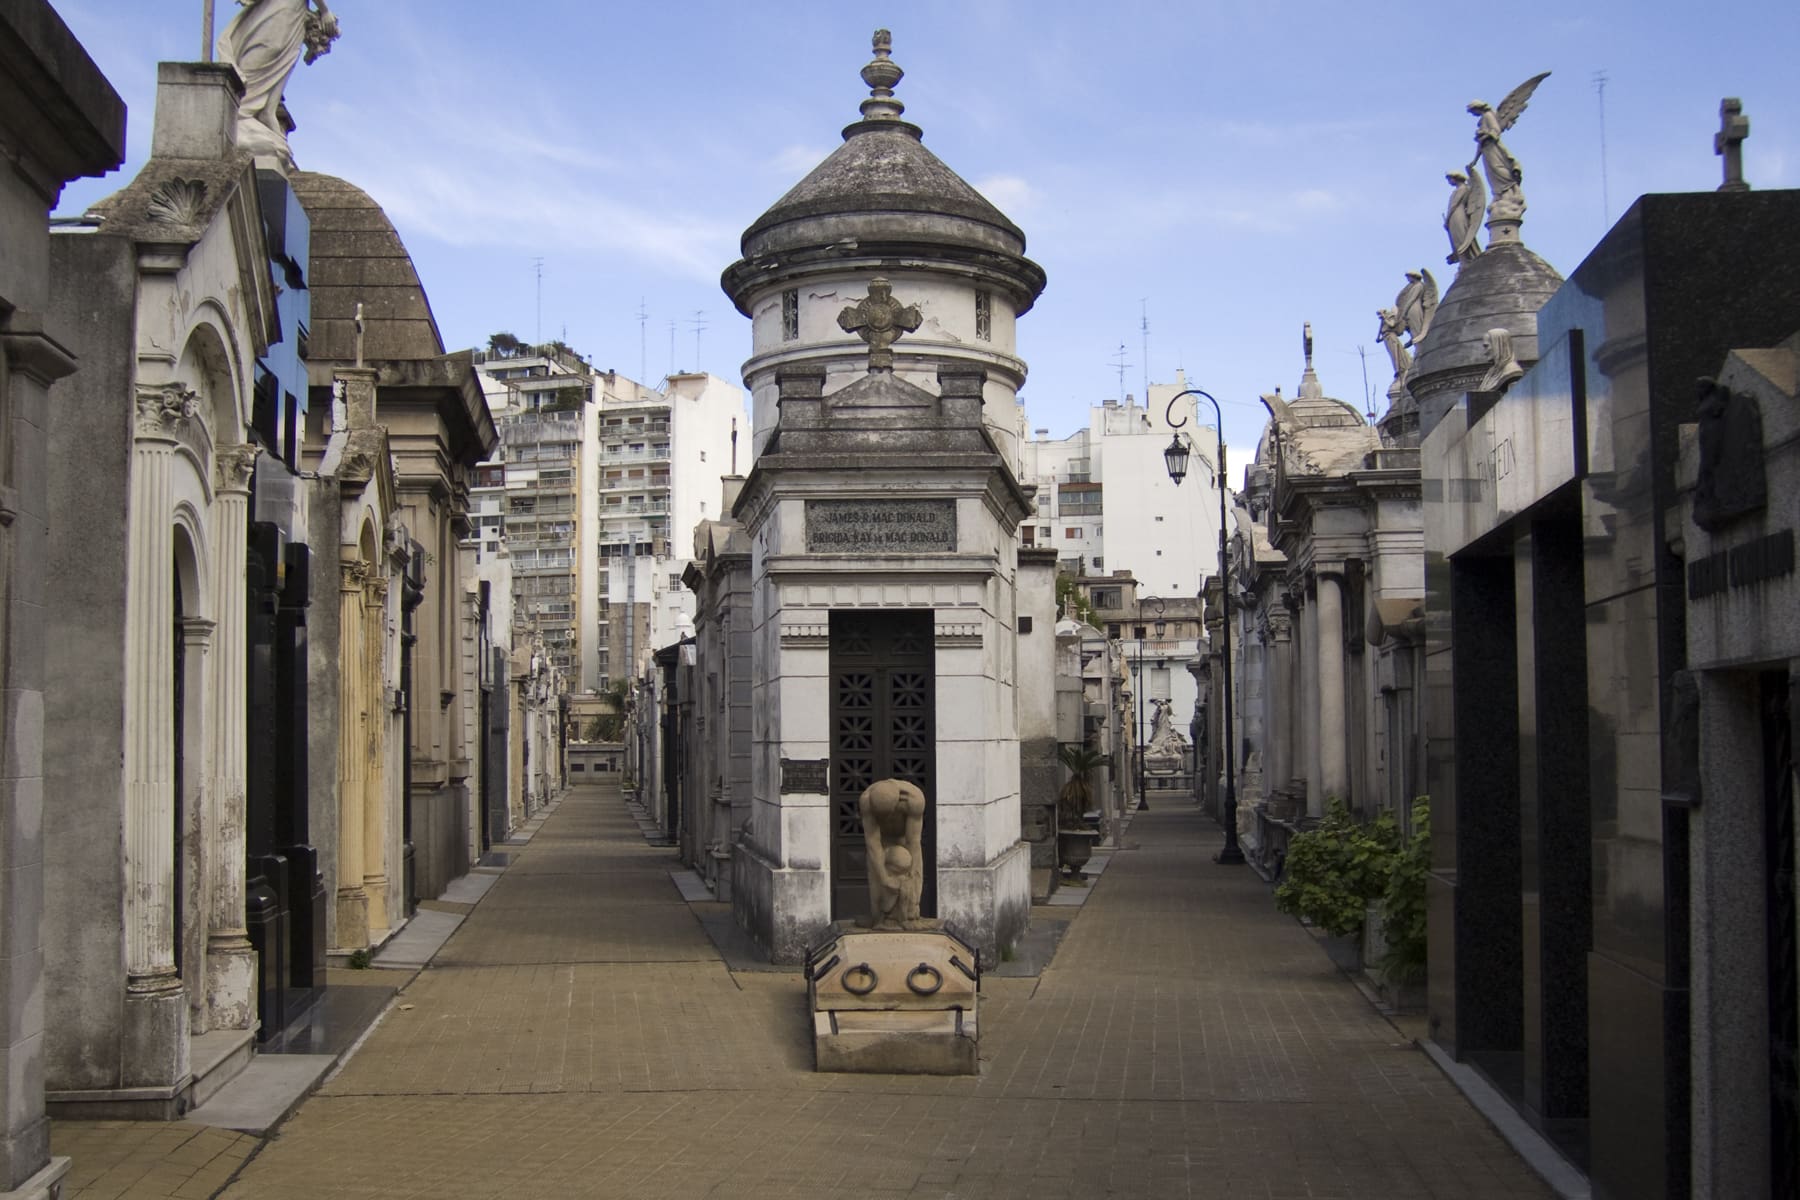 A serene and historical cemetery with ornate mausoleums, statues, and architectural details, set against a backdrop of modern buildings under a clear sky.